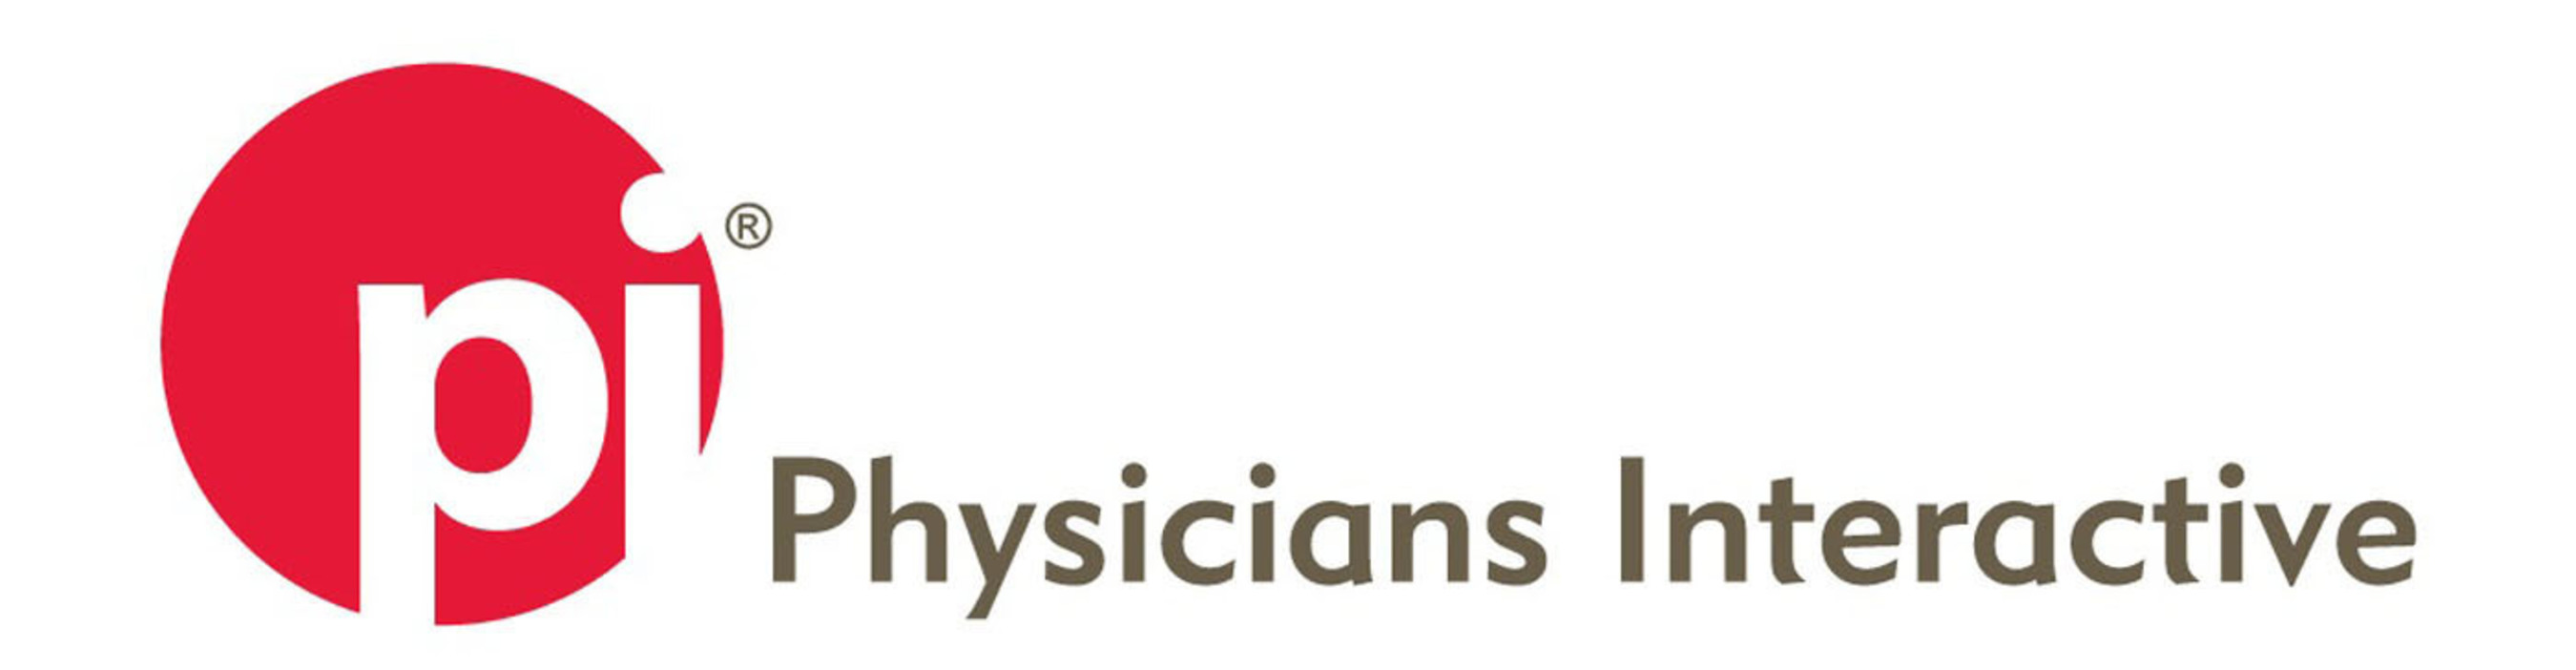 Physicians Interactive aspires to use worldwide networks of healthcare professionals and life sciences companies in ways that change the practice and business of medicine for the better. PI offers a low-cost, virtual, multi-channel marketing approach that supplements currently promoted products, as well as non-promoted and orphaned products. A key focus is services that fit into physiciansâeuro(TM) and healthcare professionalsâeuro(TM) workflow at the point-of-care. www.PhysiciansInteractive.com. (PRNewsFoto/Physicians Interactive) (PRNewsFoto/PHYSICIANS INTERACTIVE)